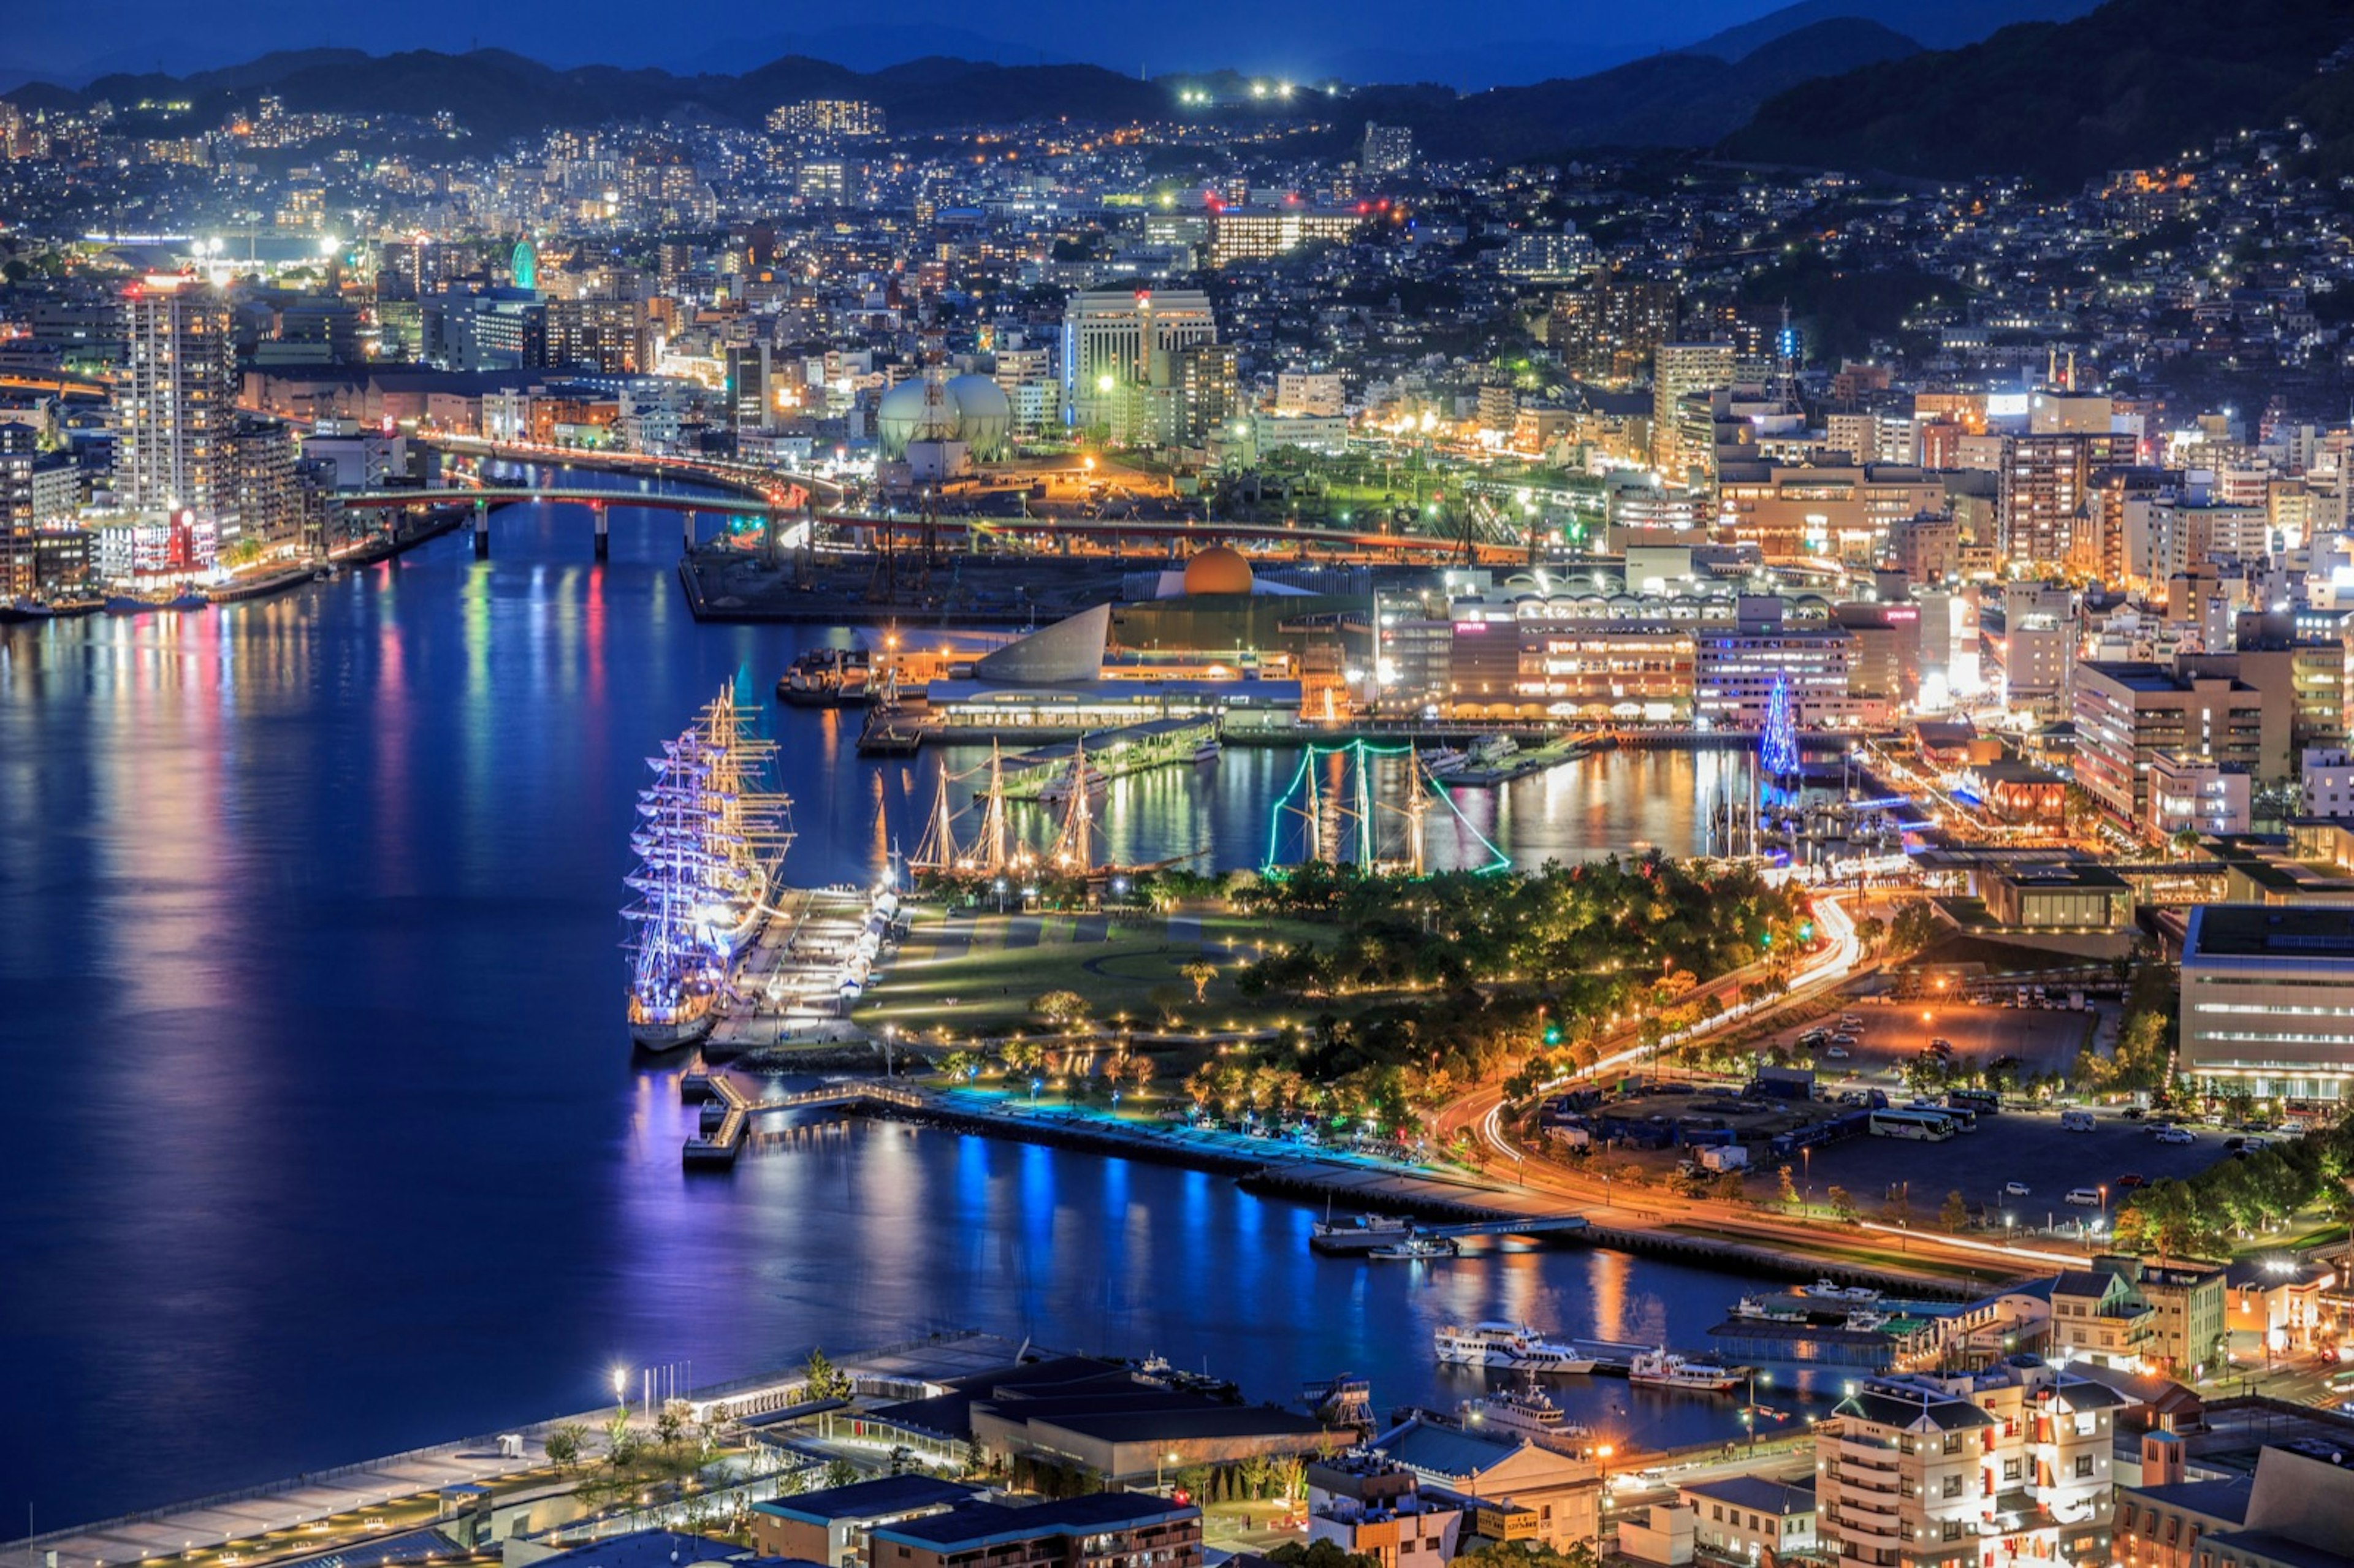 The lights of Nagasaki Harbor illuminate the water with mountains in the background © tomophotography / Getty images